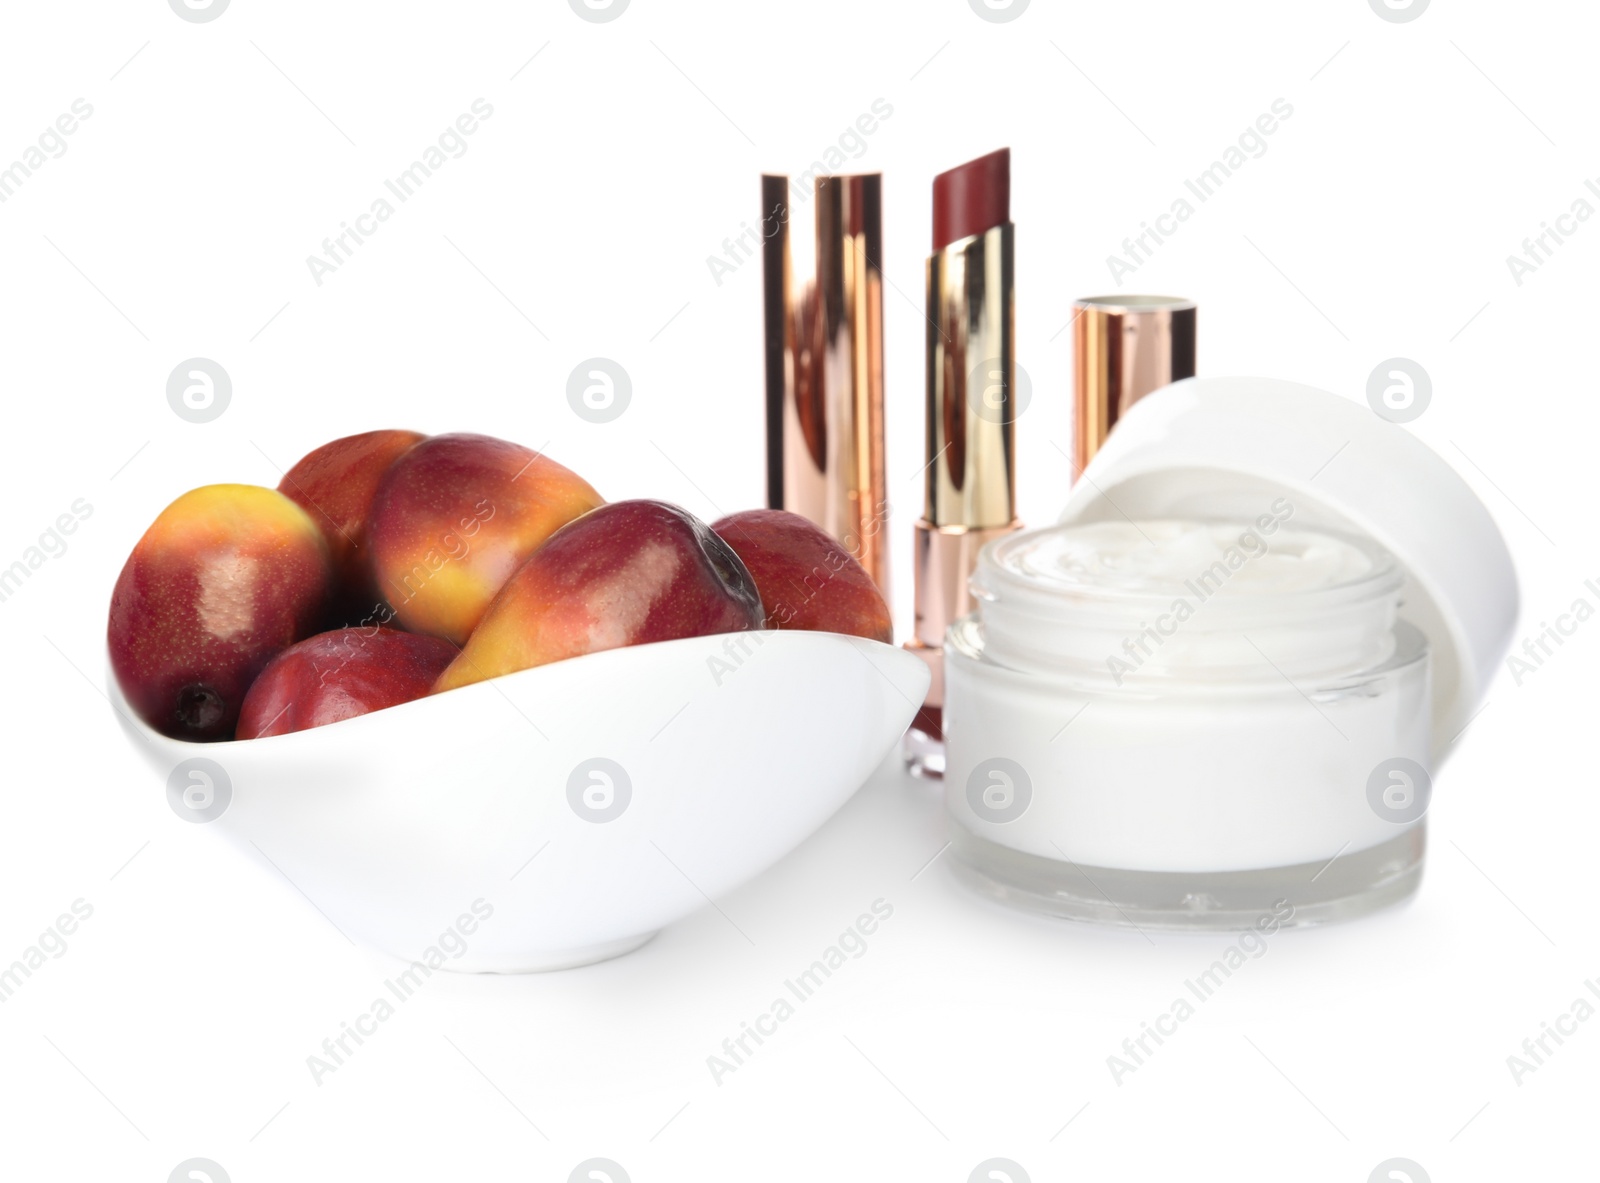 Image of Fresh ripe palm oil fruits and cosmetic products on white background